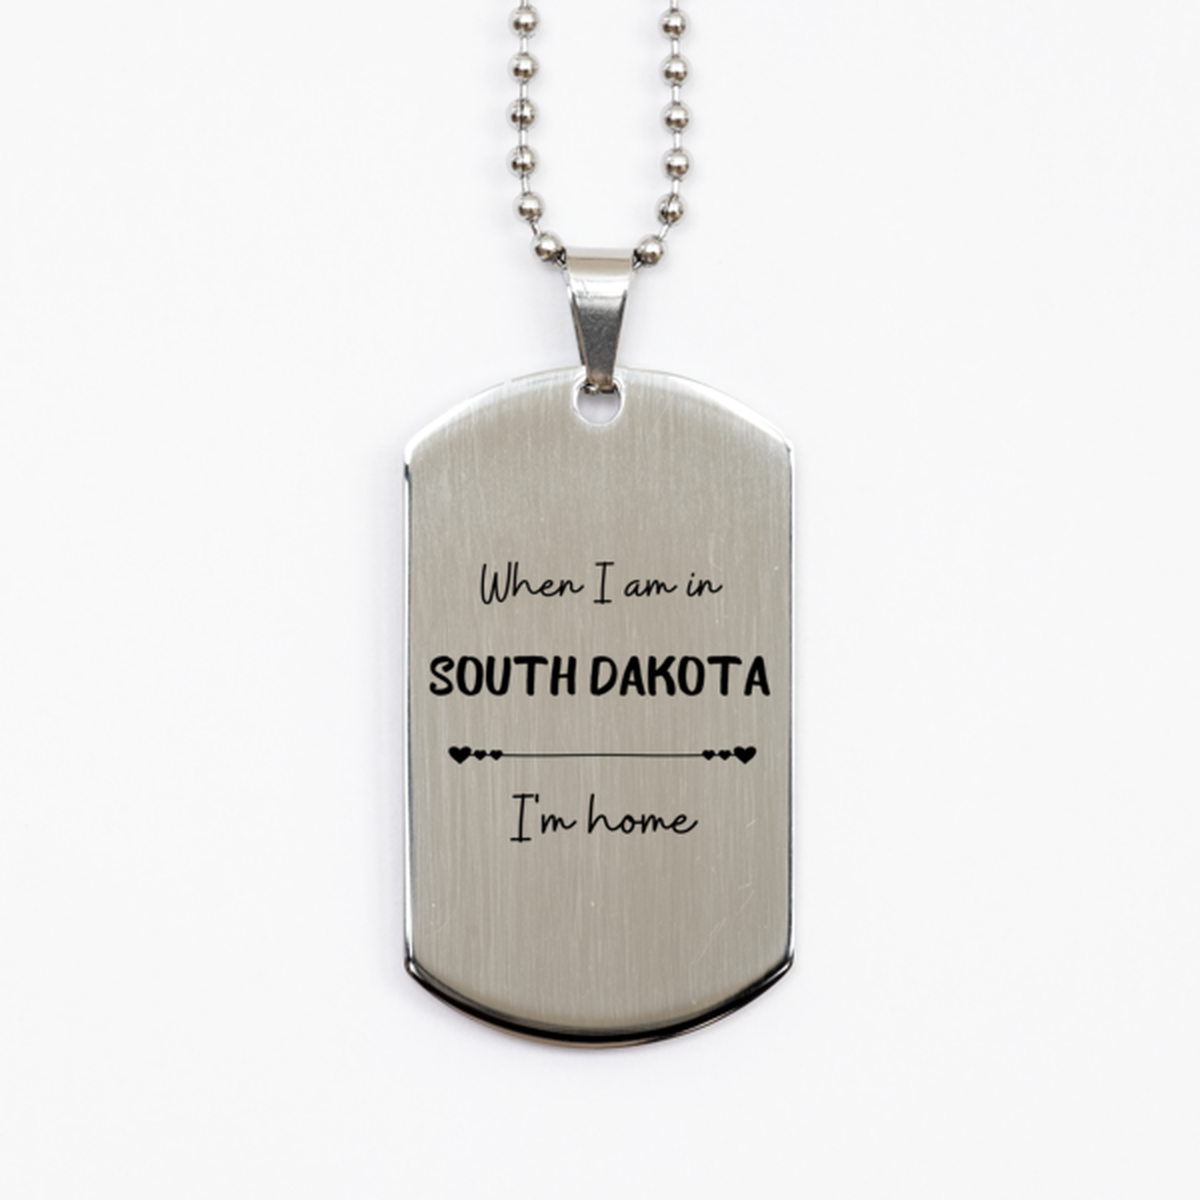 When I am in South Dakota I'm home Silver Dog Tag, Cheap Gifts For South Dakota, State South Dakota Birthday Gifts for Friends Coworker